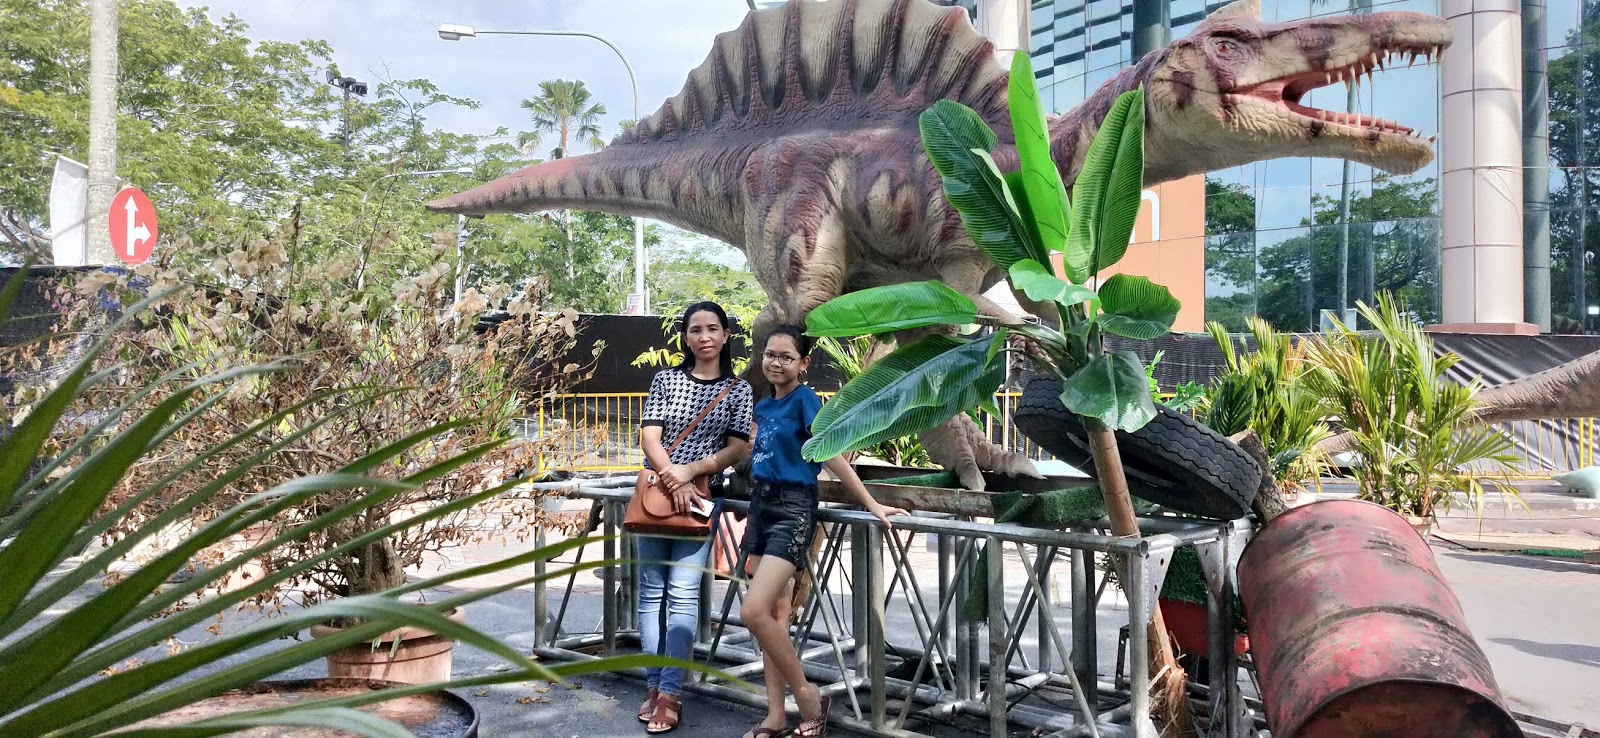 Dinosaur Lost in the MIRI City - Chris Blog  Your Online 